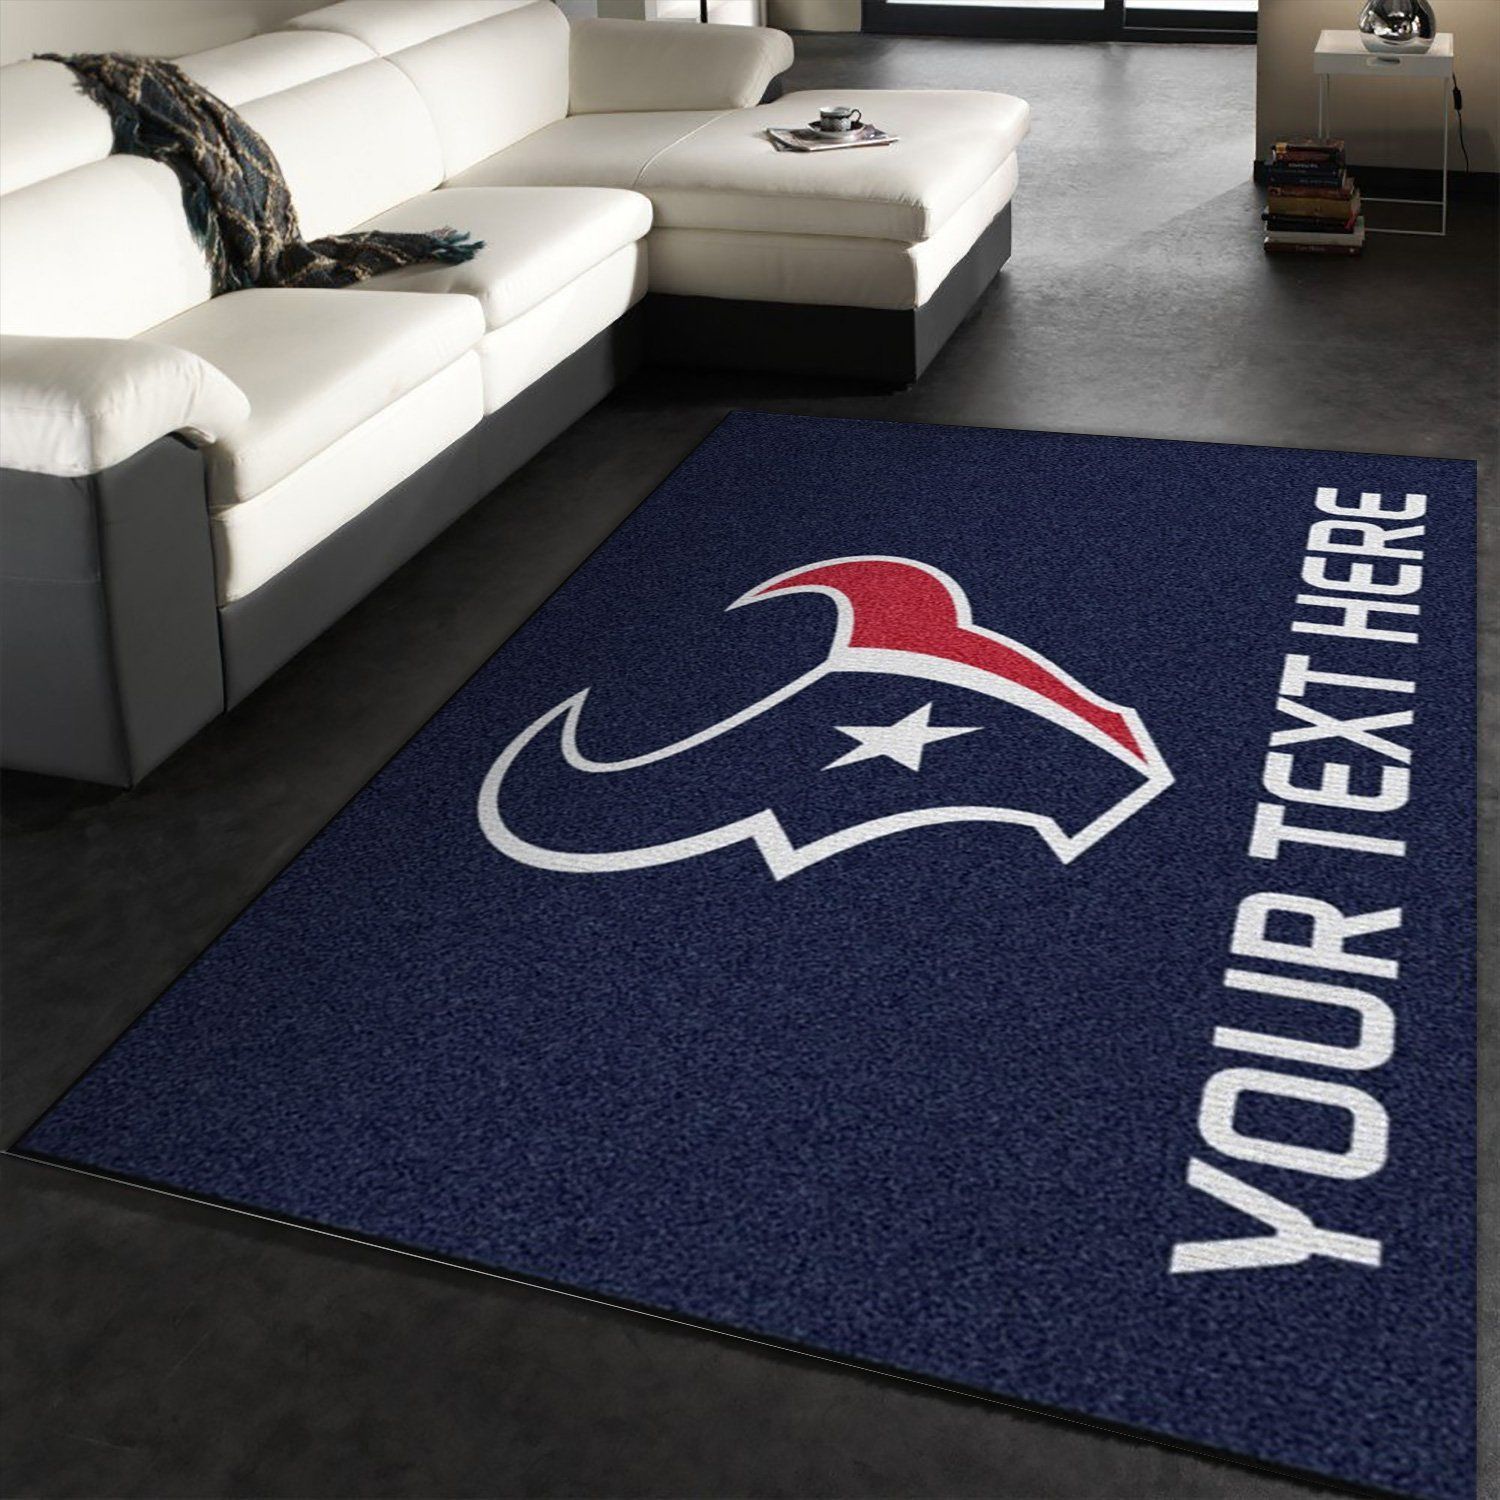 Customizable Houston Texans Personalized Accent Rug NFL Area Rug Carpet